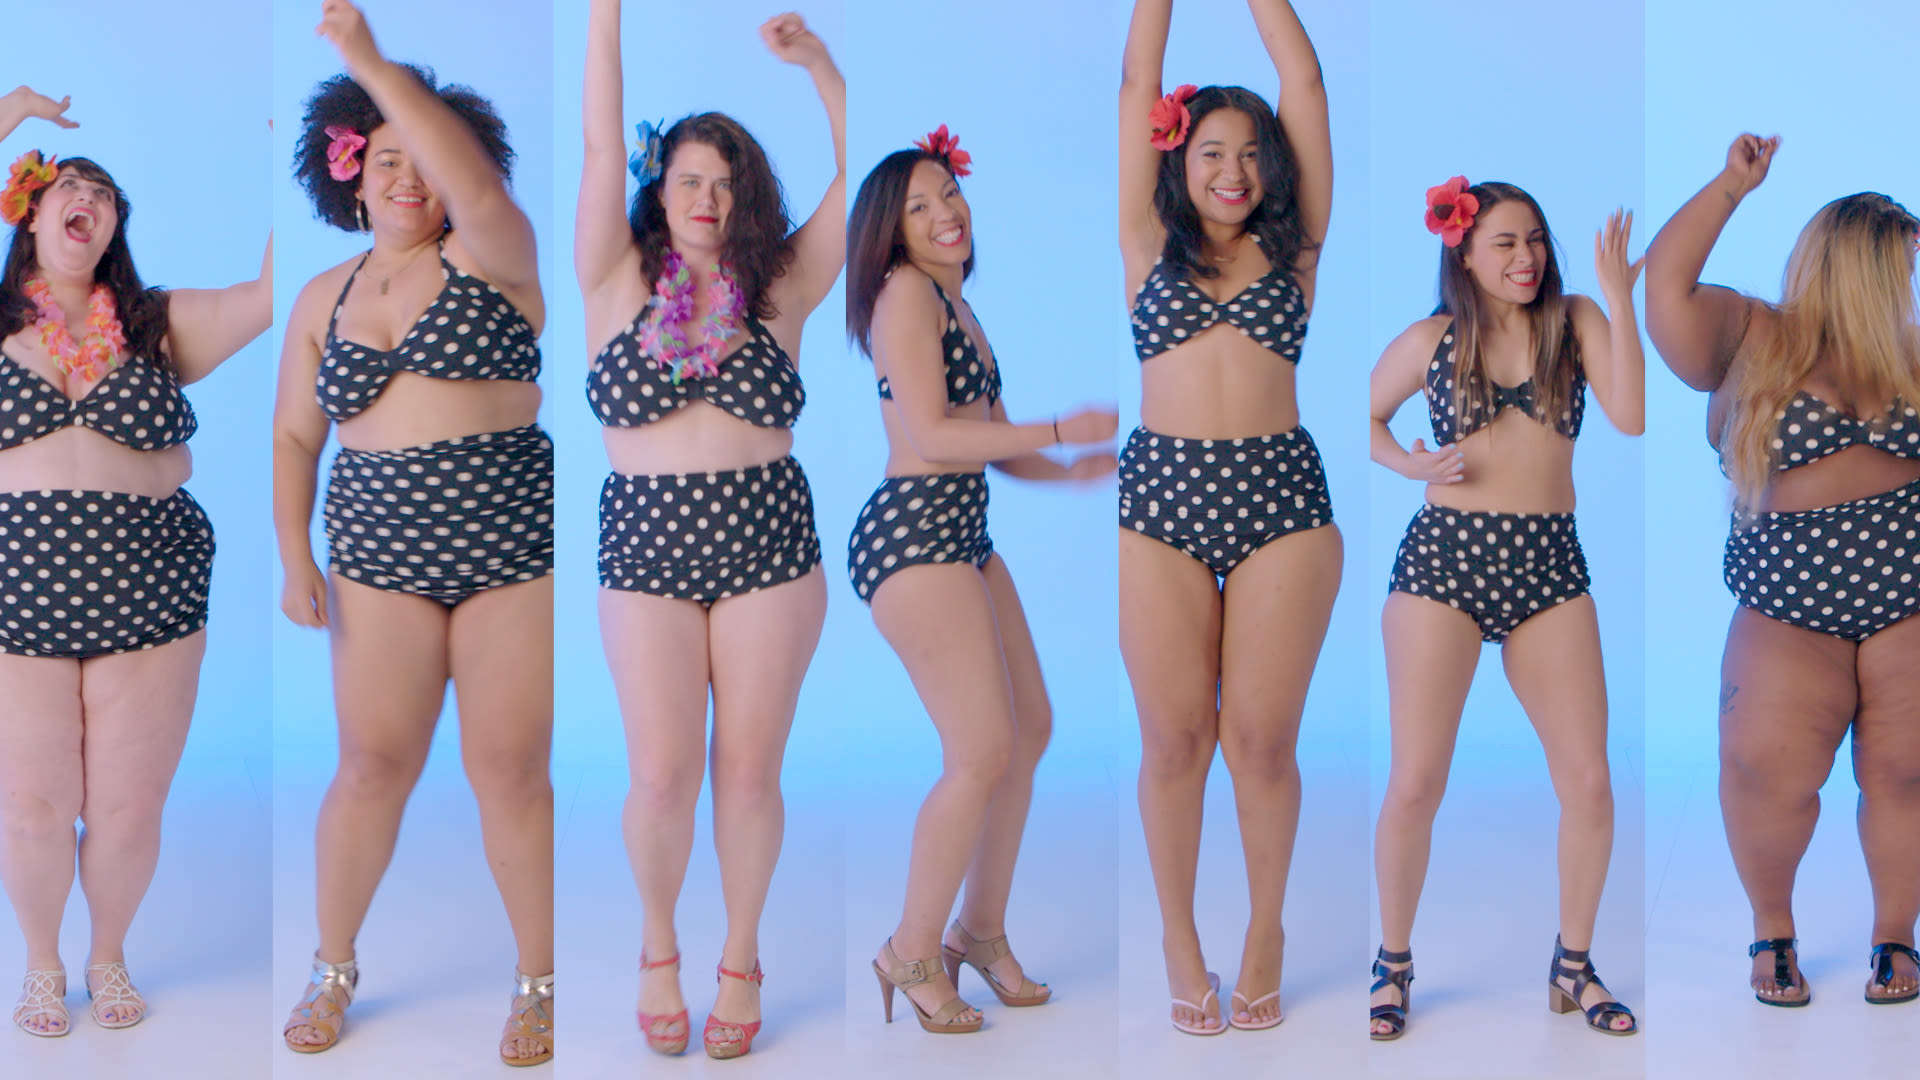 Watch Women Sizes 4 Through 30 Try on the Same Swimsuit